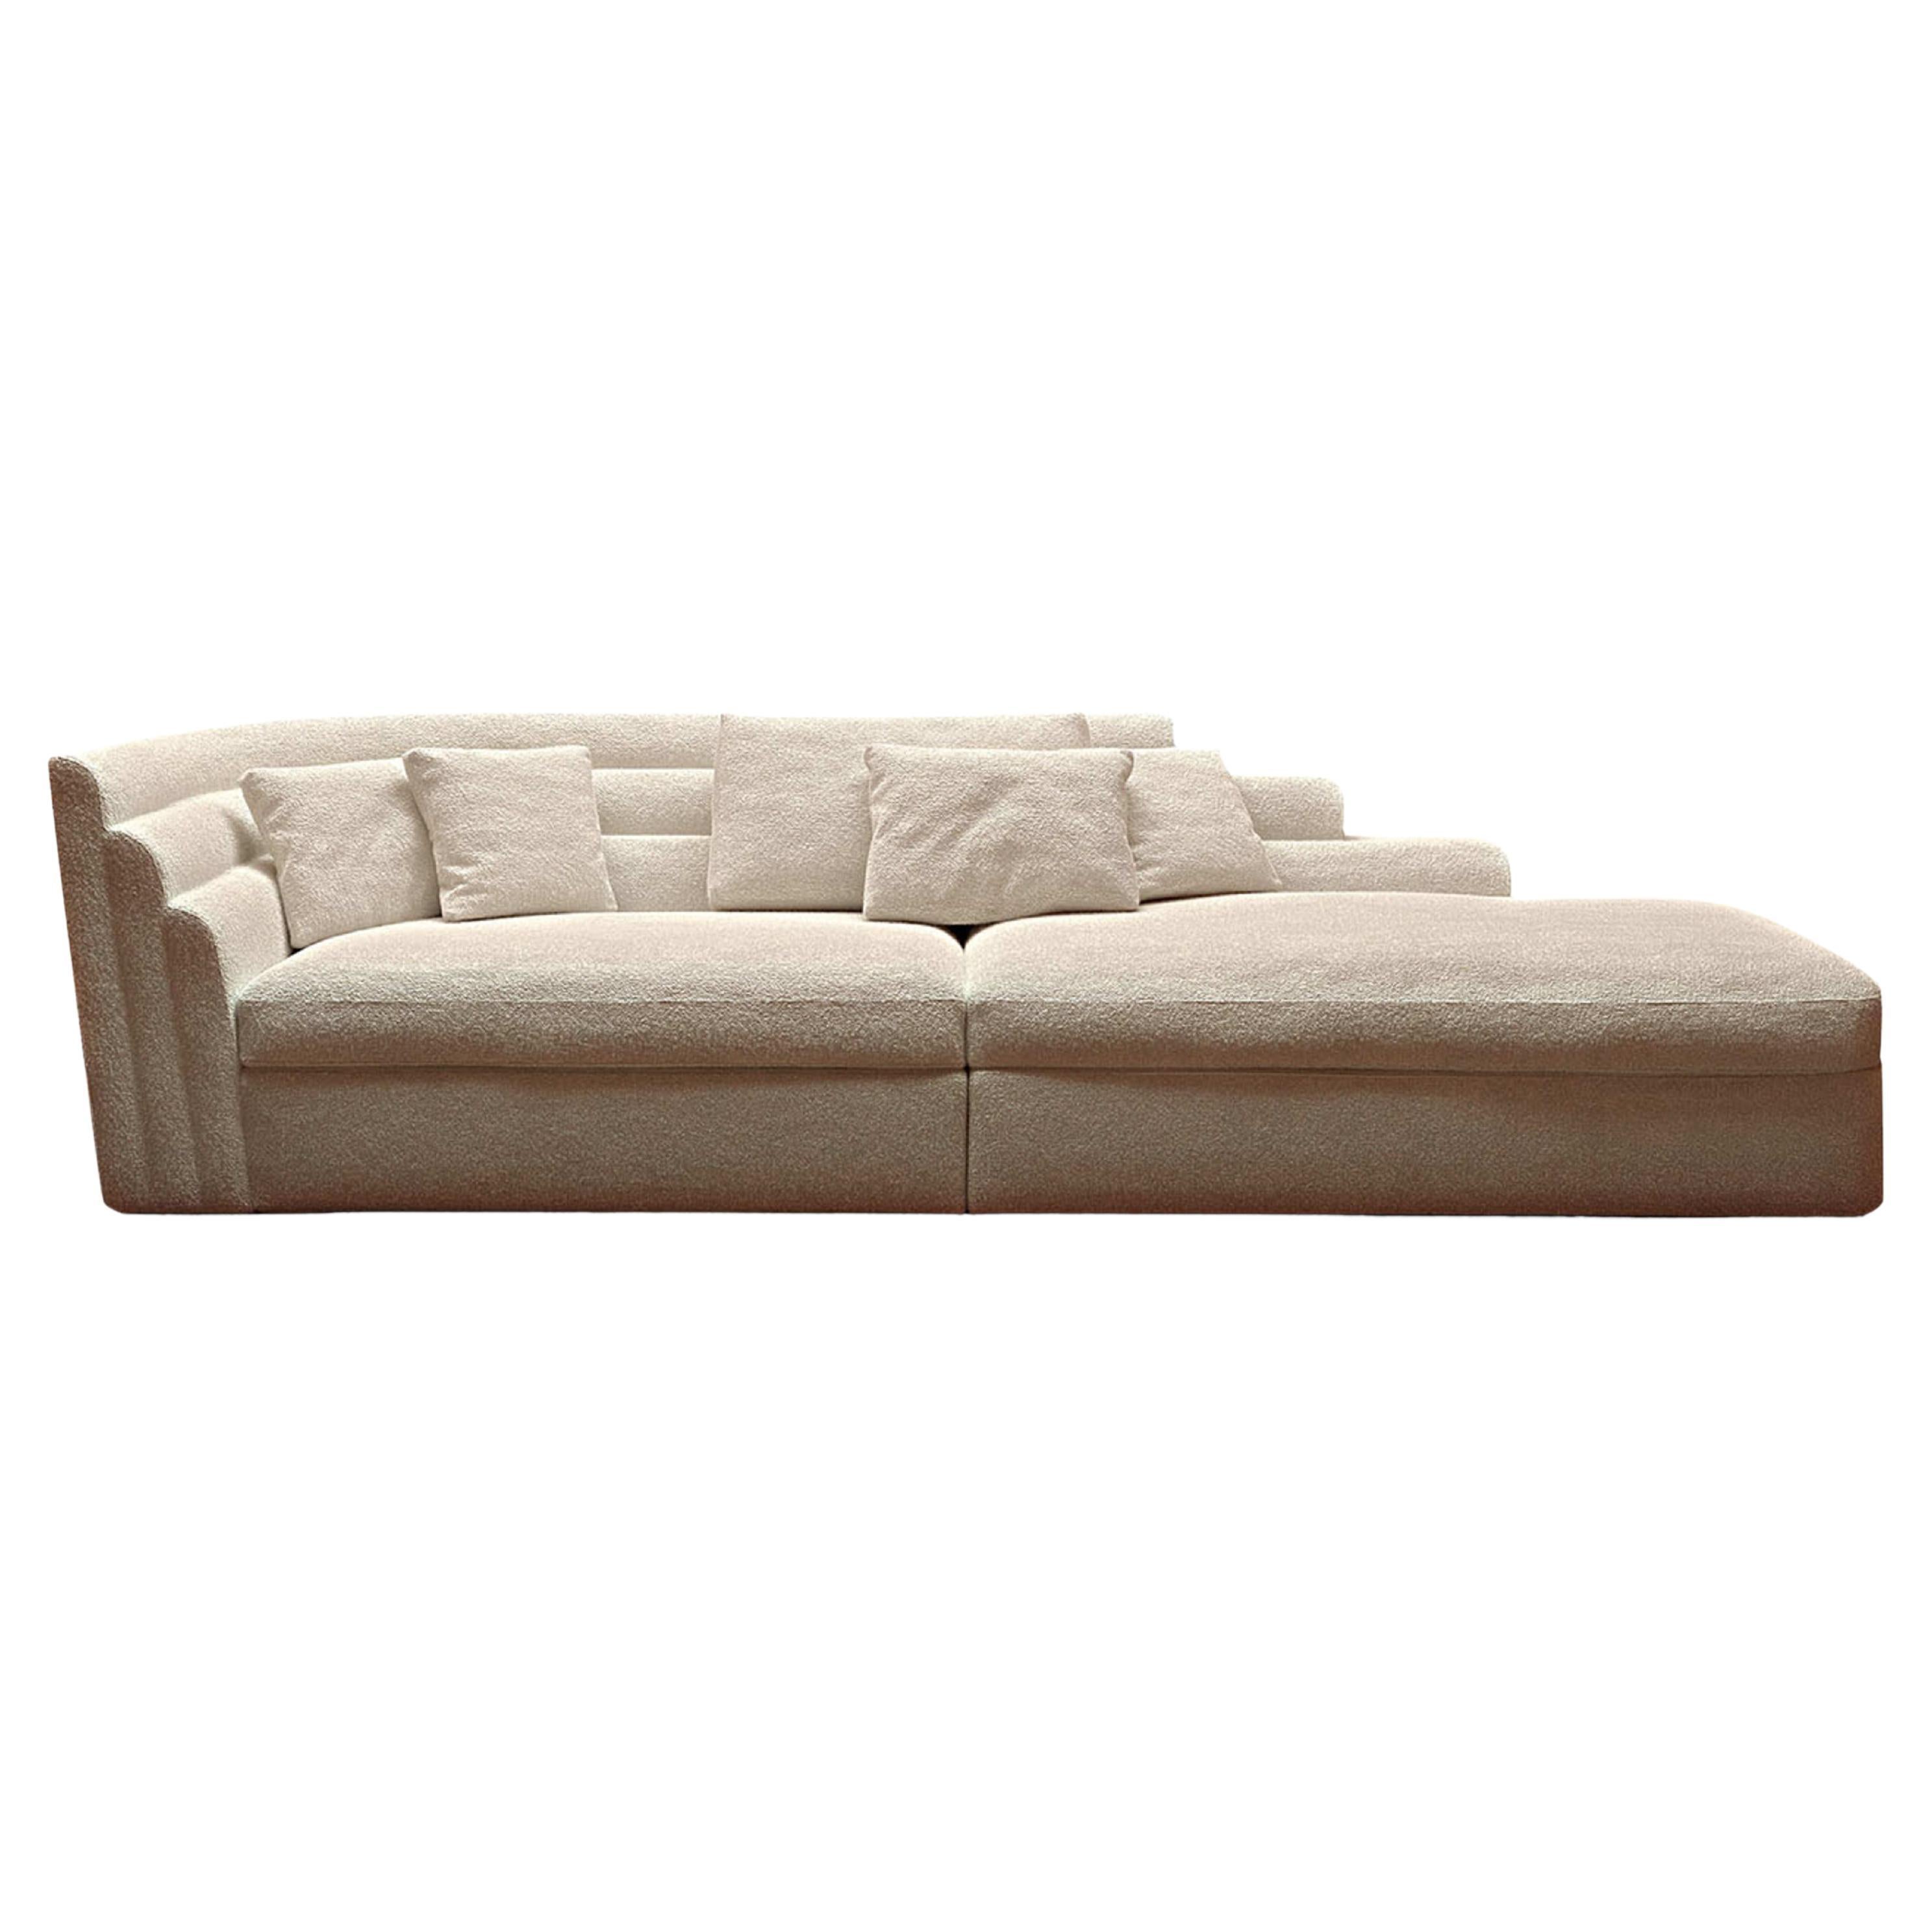 Theater Sofa For Sale